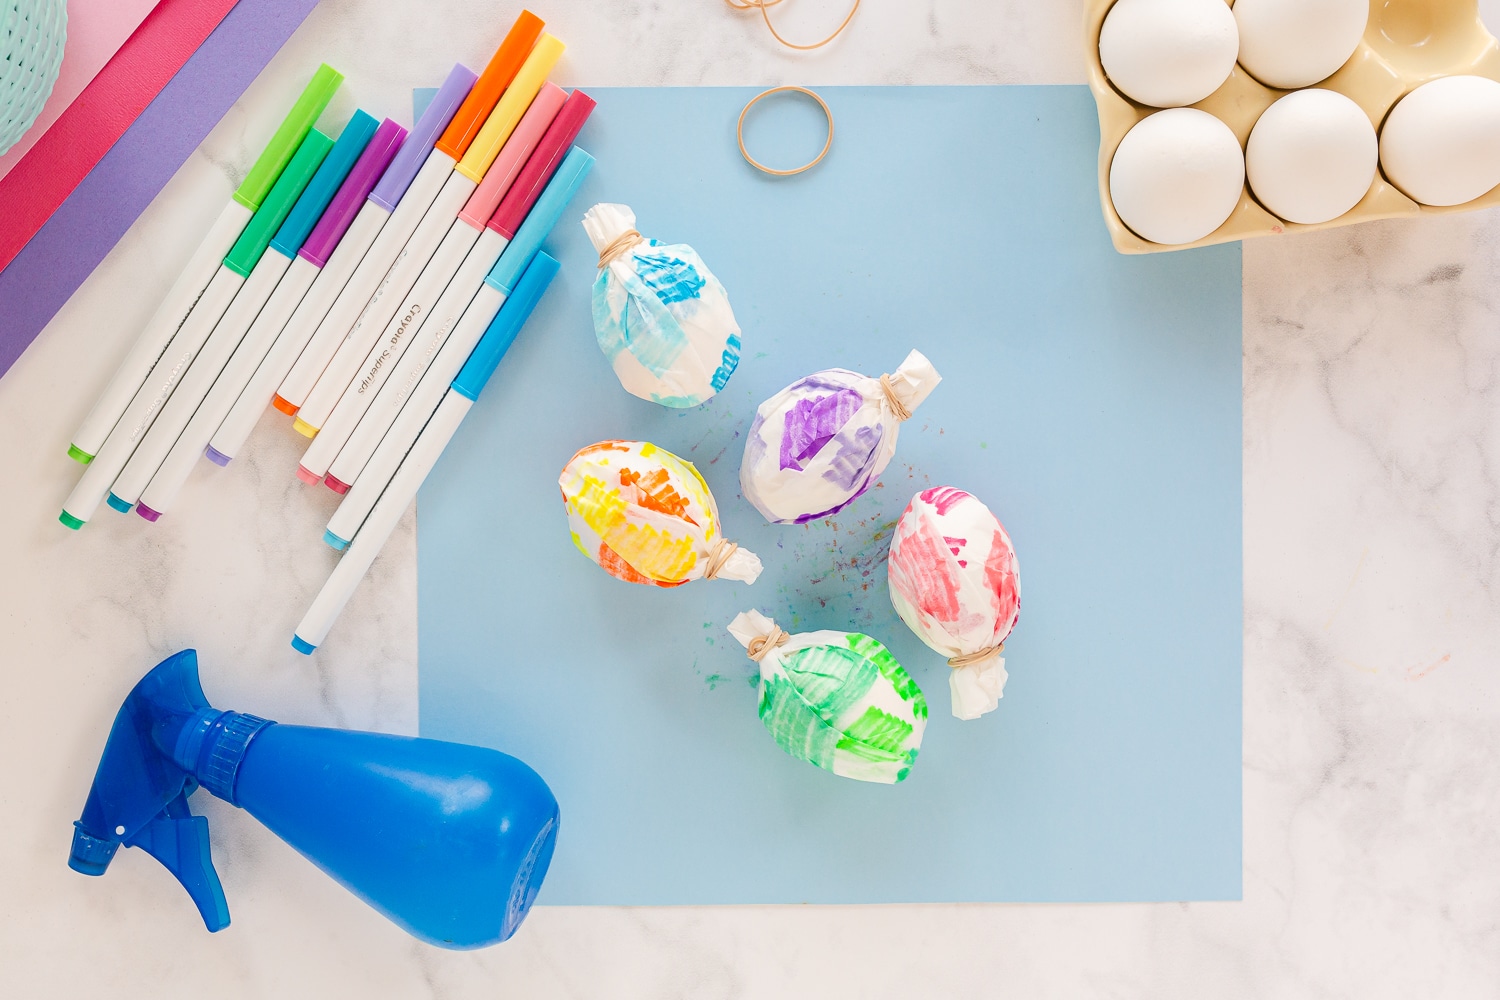 wrap hardboiled eggs in colored paper and secure with rubber band